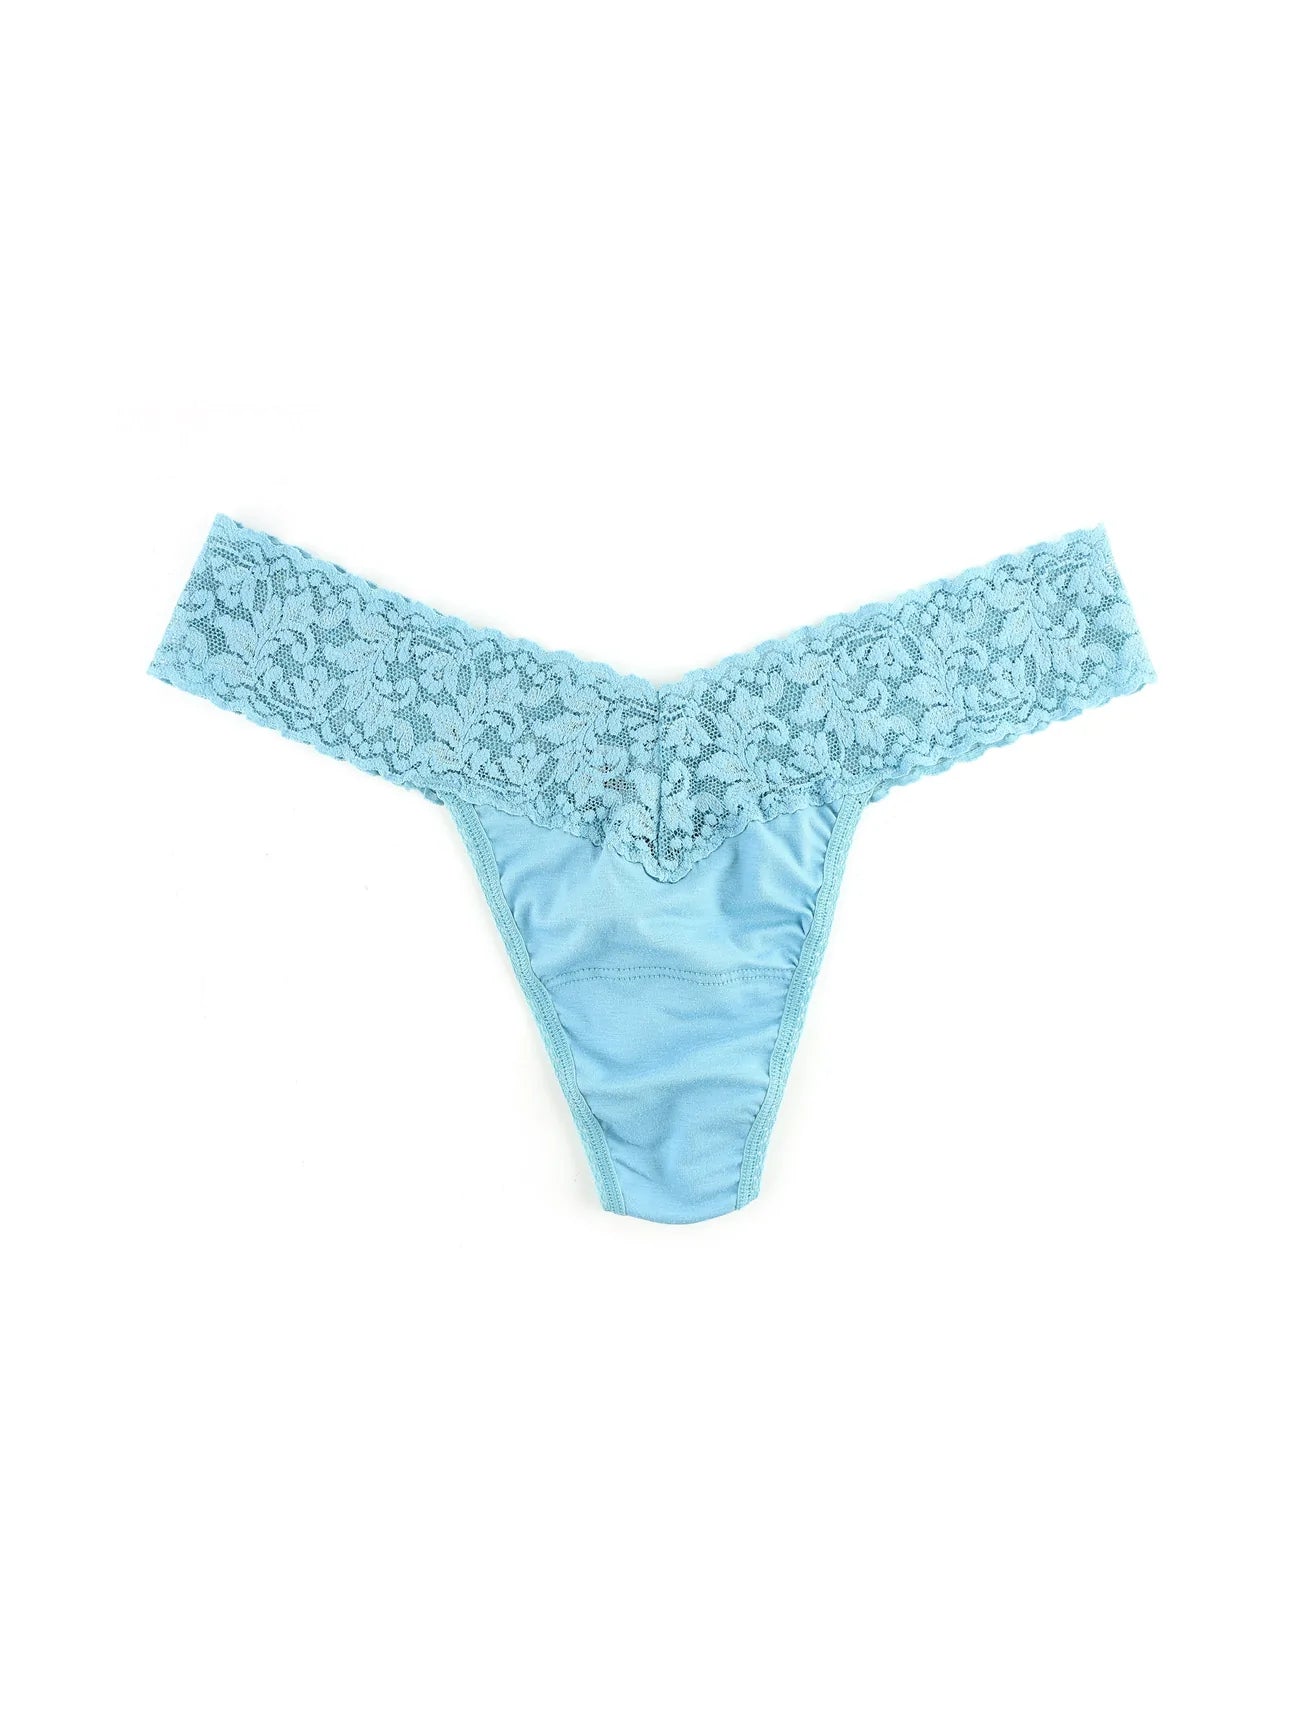 Supima Cotton Original Rise Thong In Mineral Blue- Hanky Panky